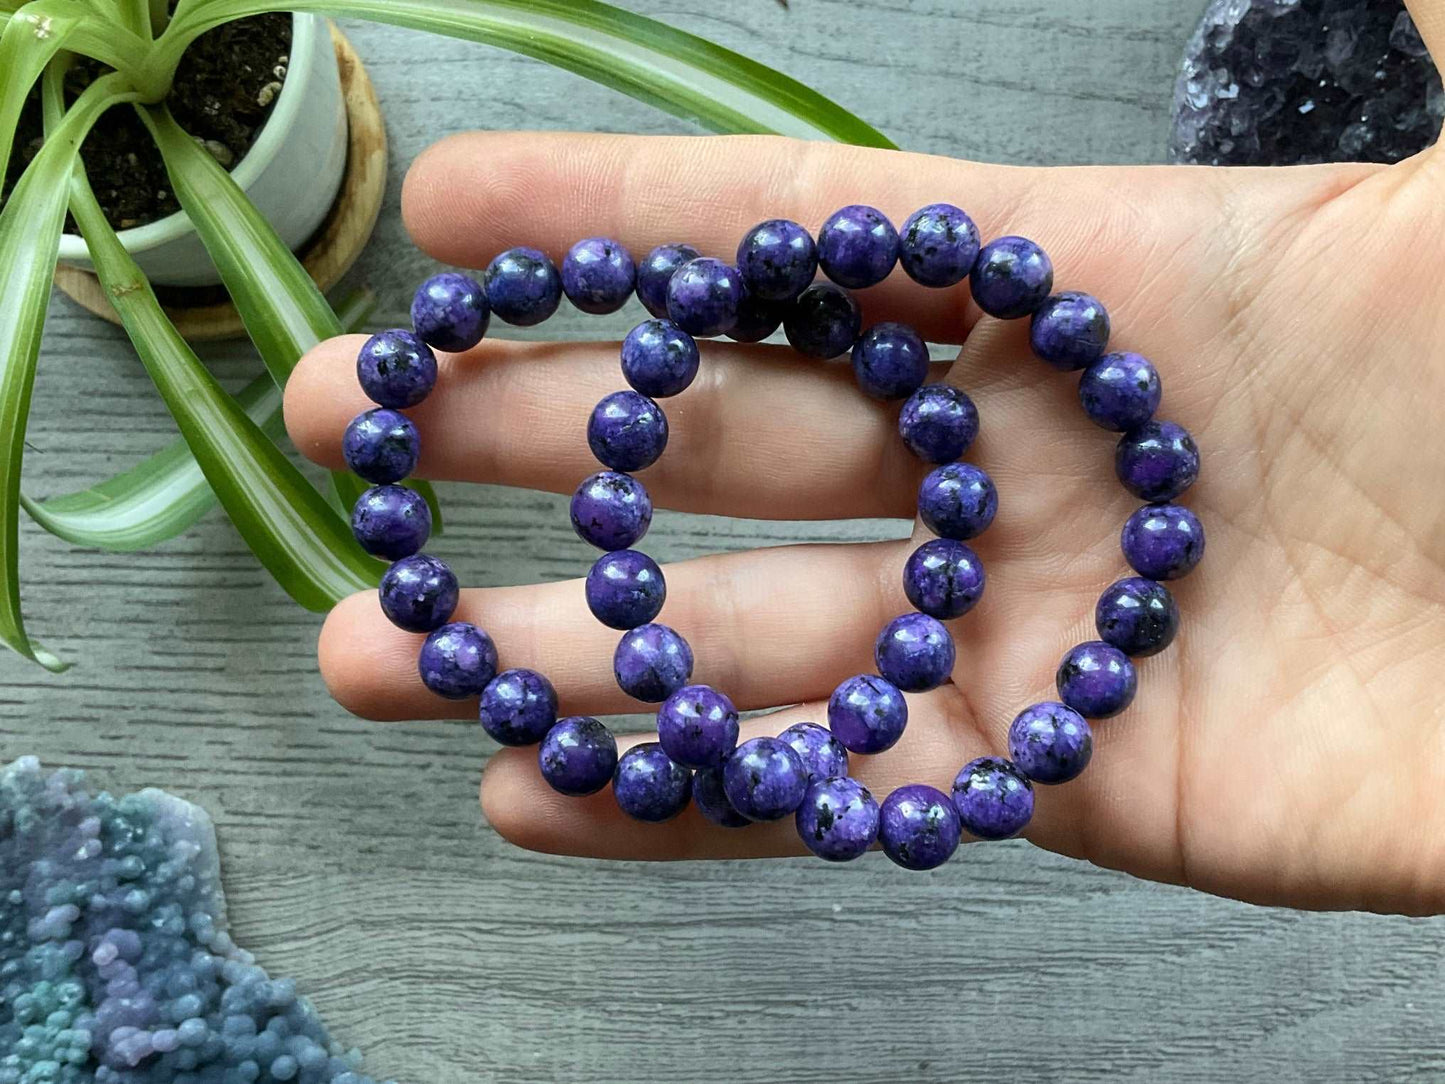 Pictured is a faux charoite bead bracelet.